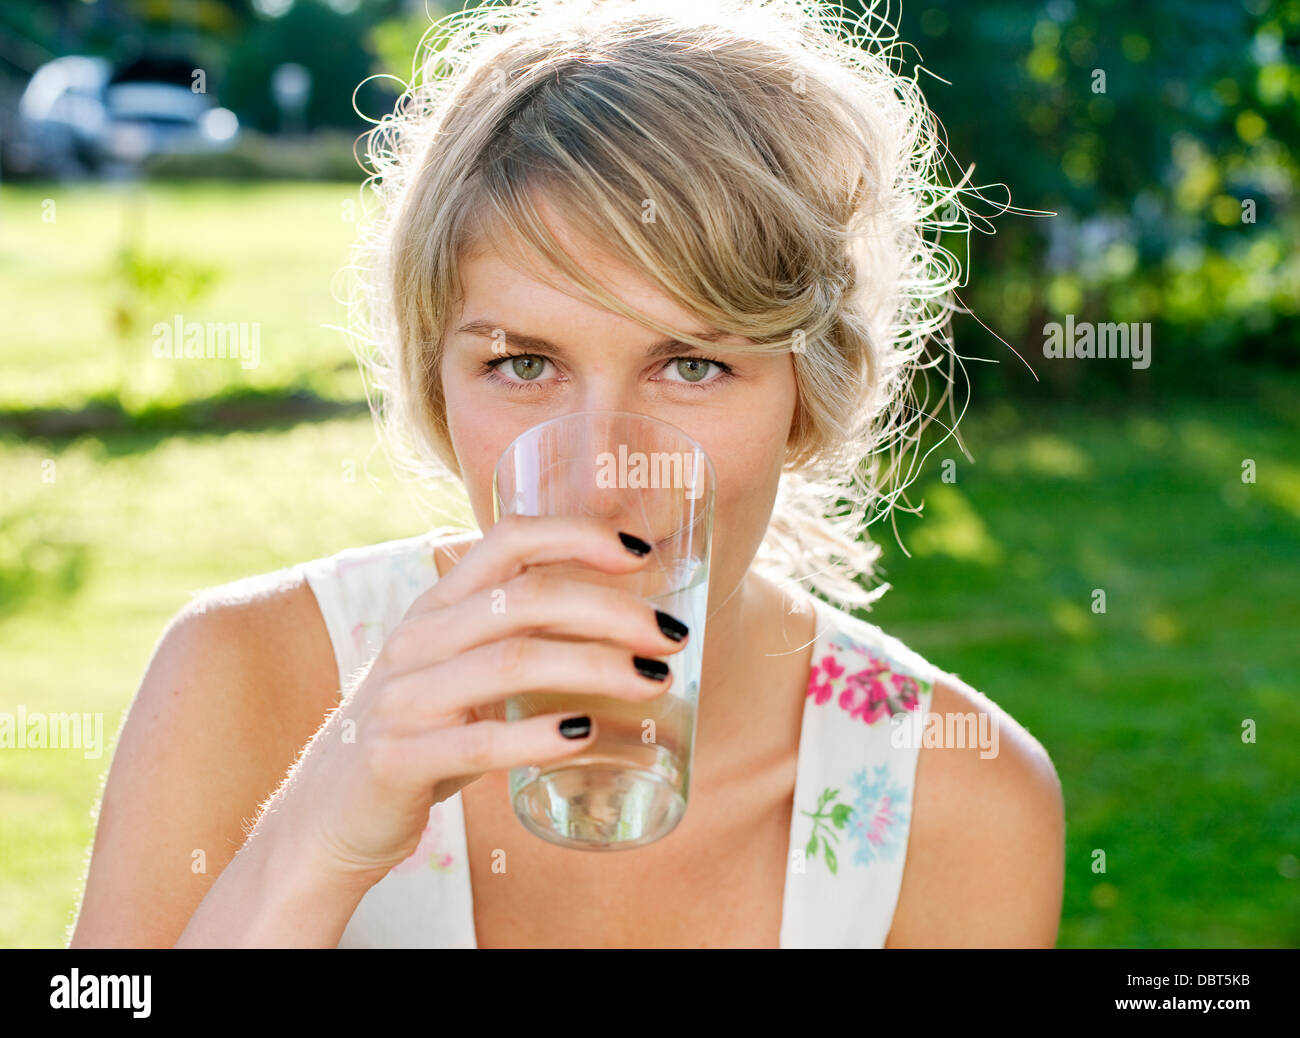 Boras, young woman enjoying boisson froide Banque D'Images